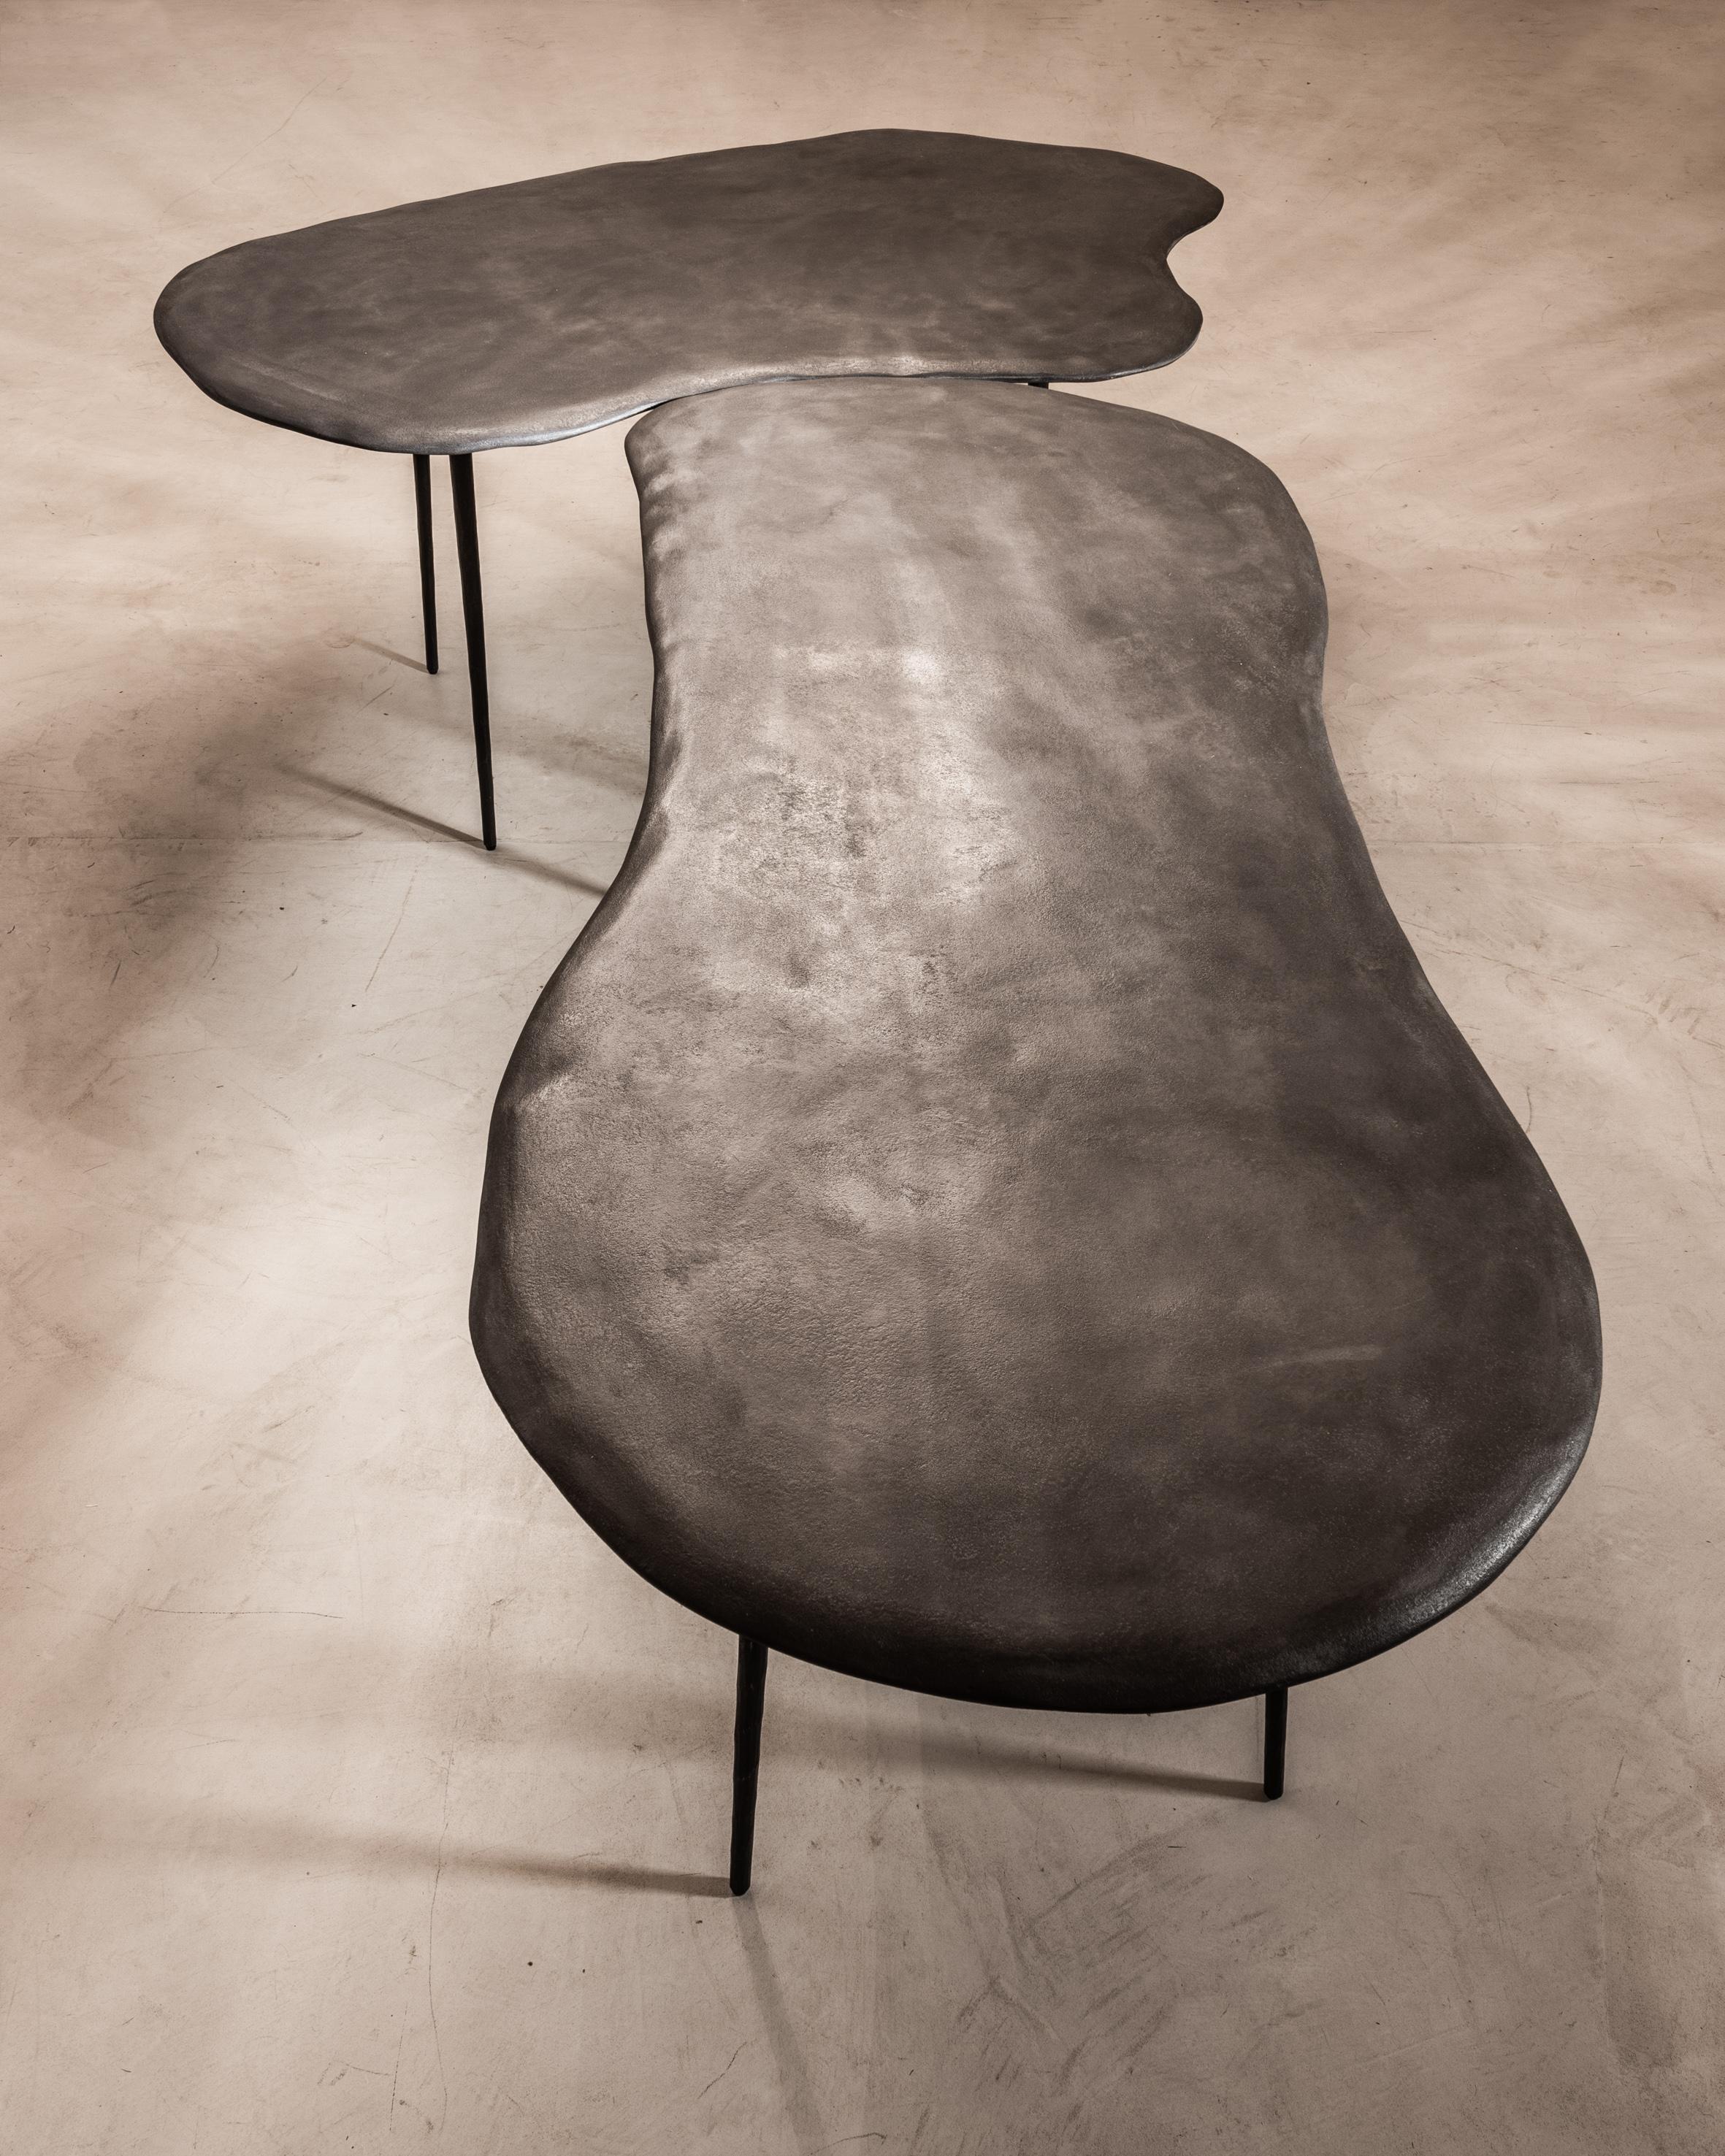 Varenna table duo by Studio Emblématique
Dimensions: 
- W 157 x D 92 x H 76 cm
- W 162 x D 95 x H 76 cm

Materials: Stonegrain table top with conical metal hammered legs

Pushing the boundaries, going the extra mile to find the extraordinary